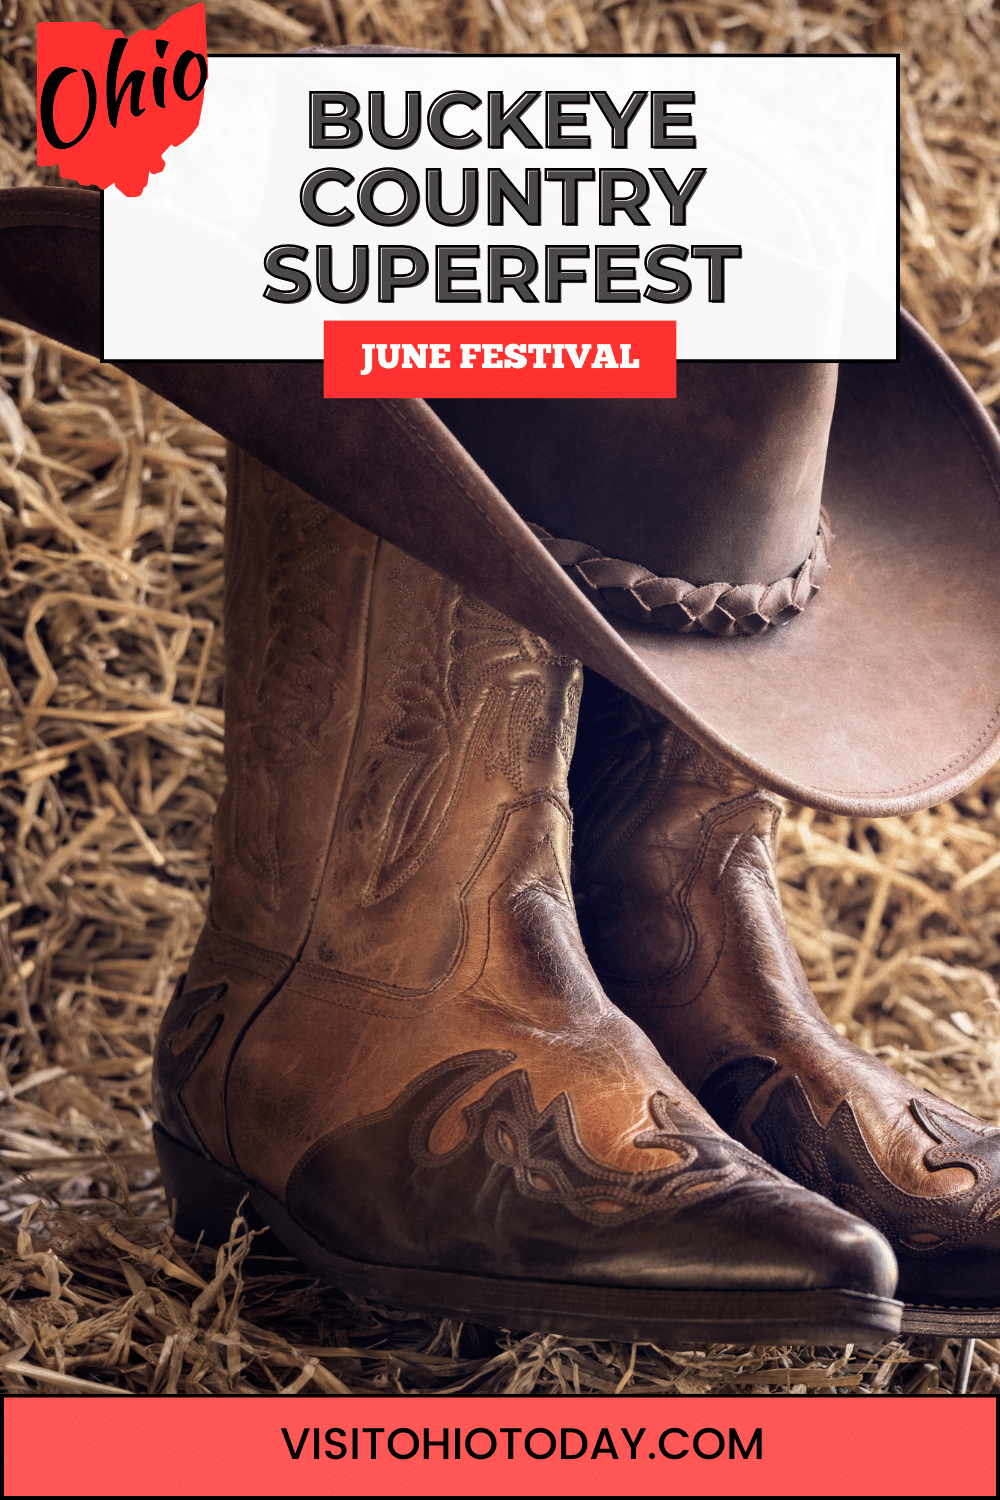 Buckeye Country Superfest is a two-day, outdoor country music concert in Columbus in late June.